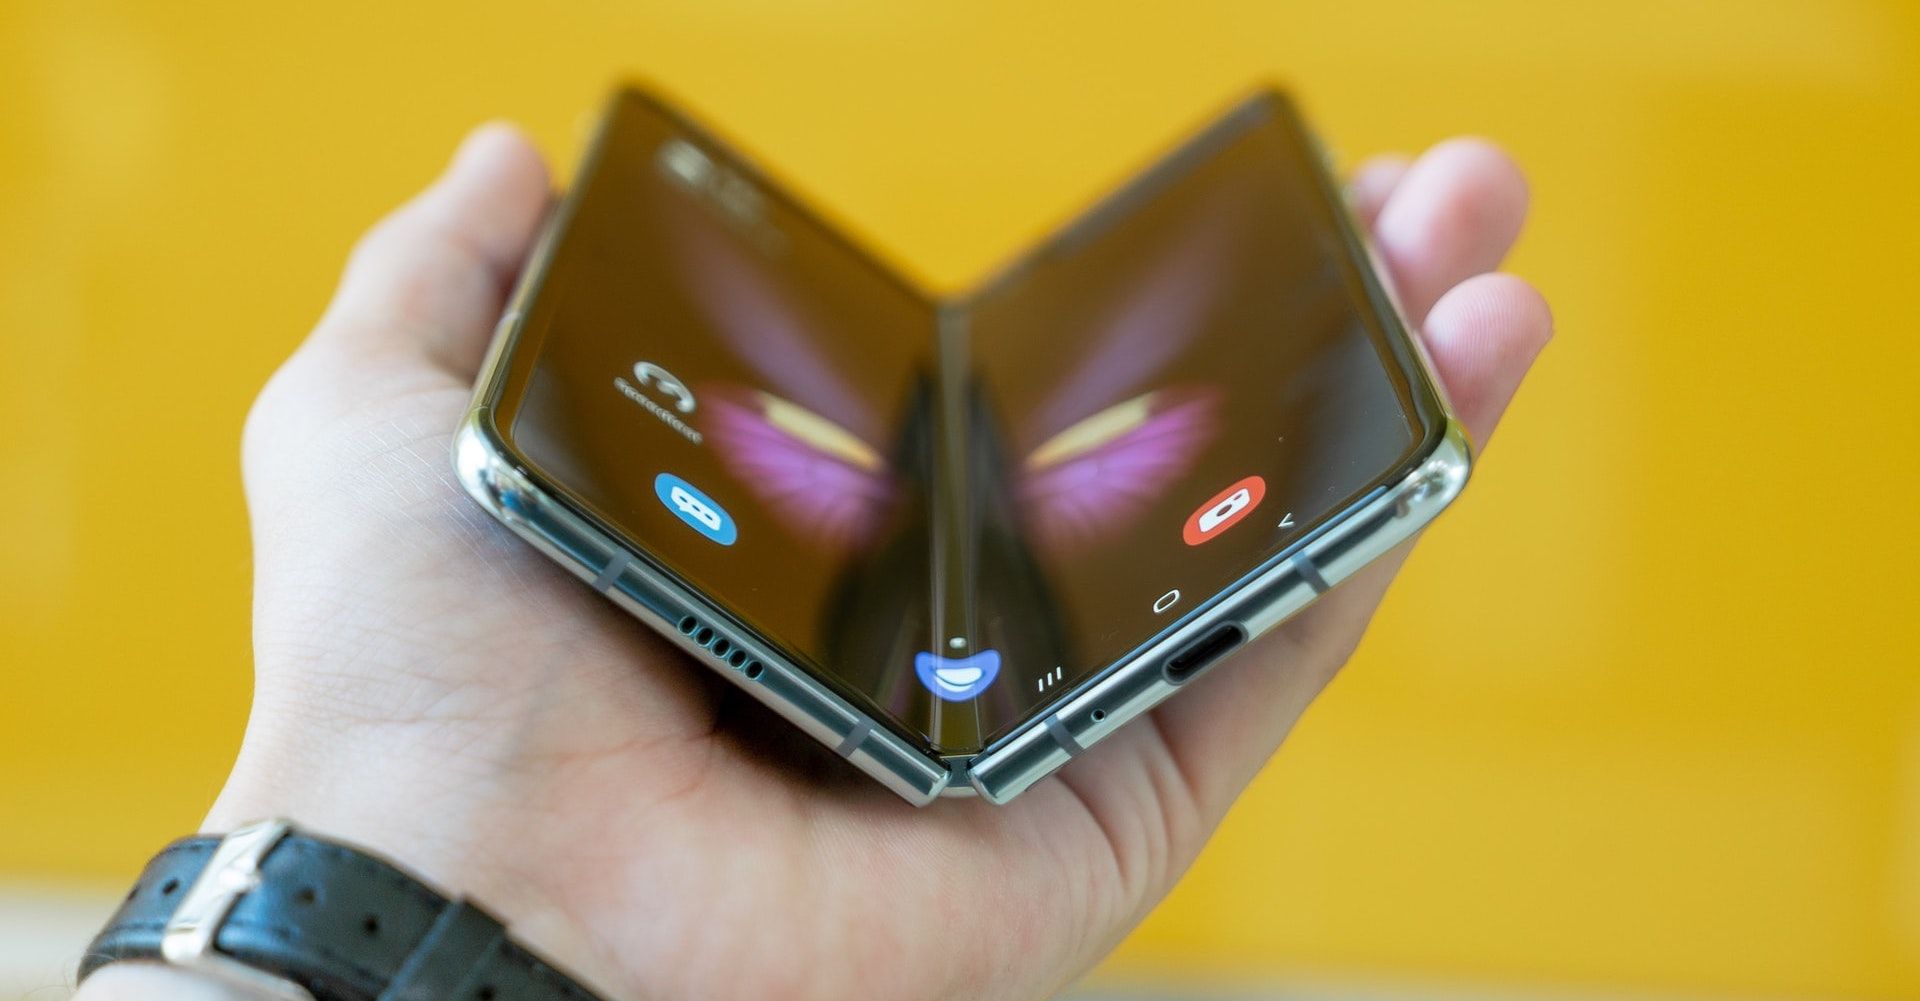 A single hand holding a Galaxy Fold phone half open against a bright yellow background